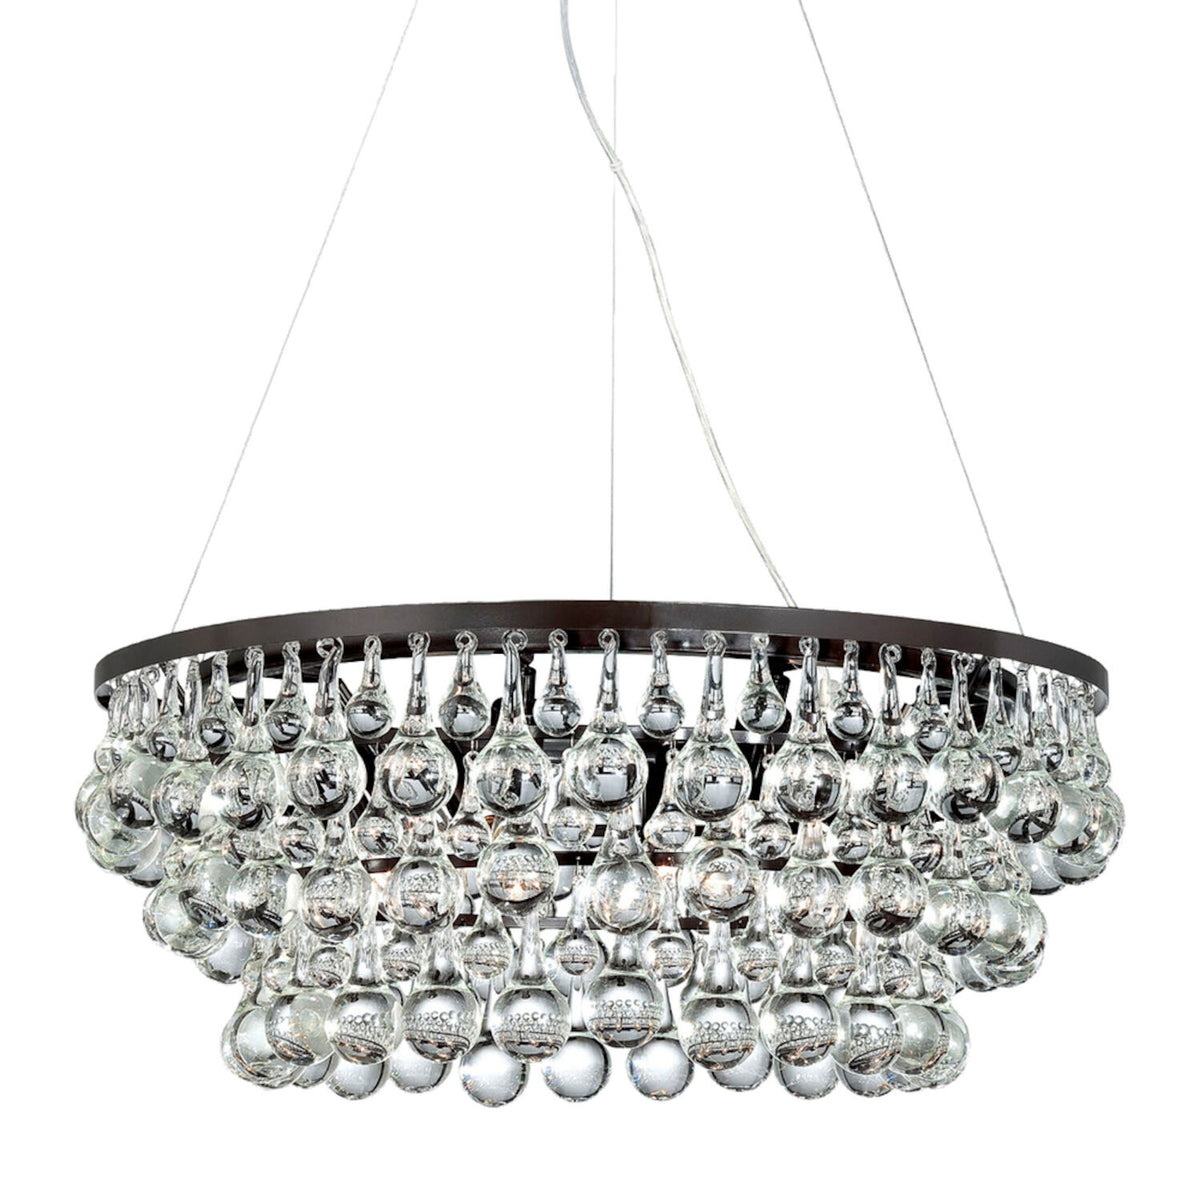 CANTO 8-LIGHT CHANDELIER